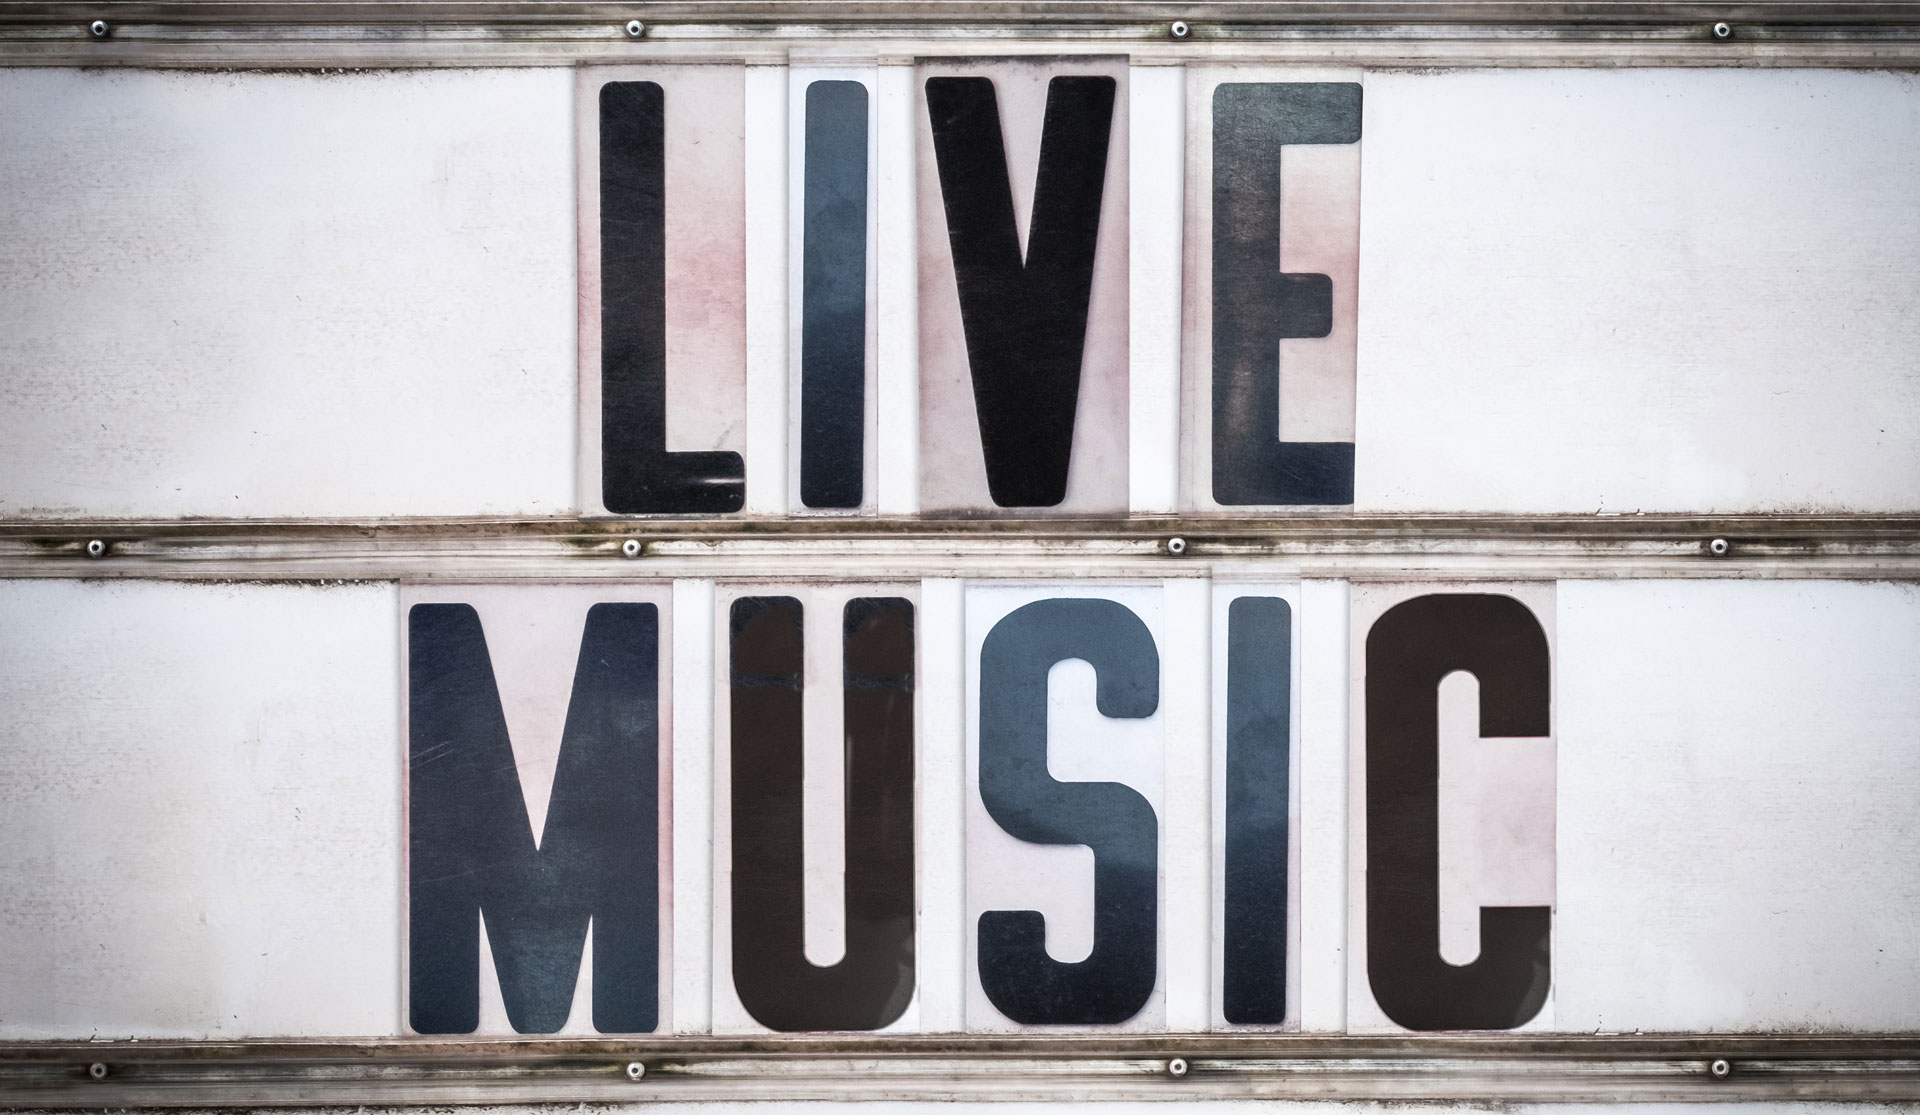 live music sign